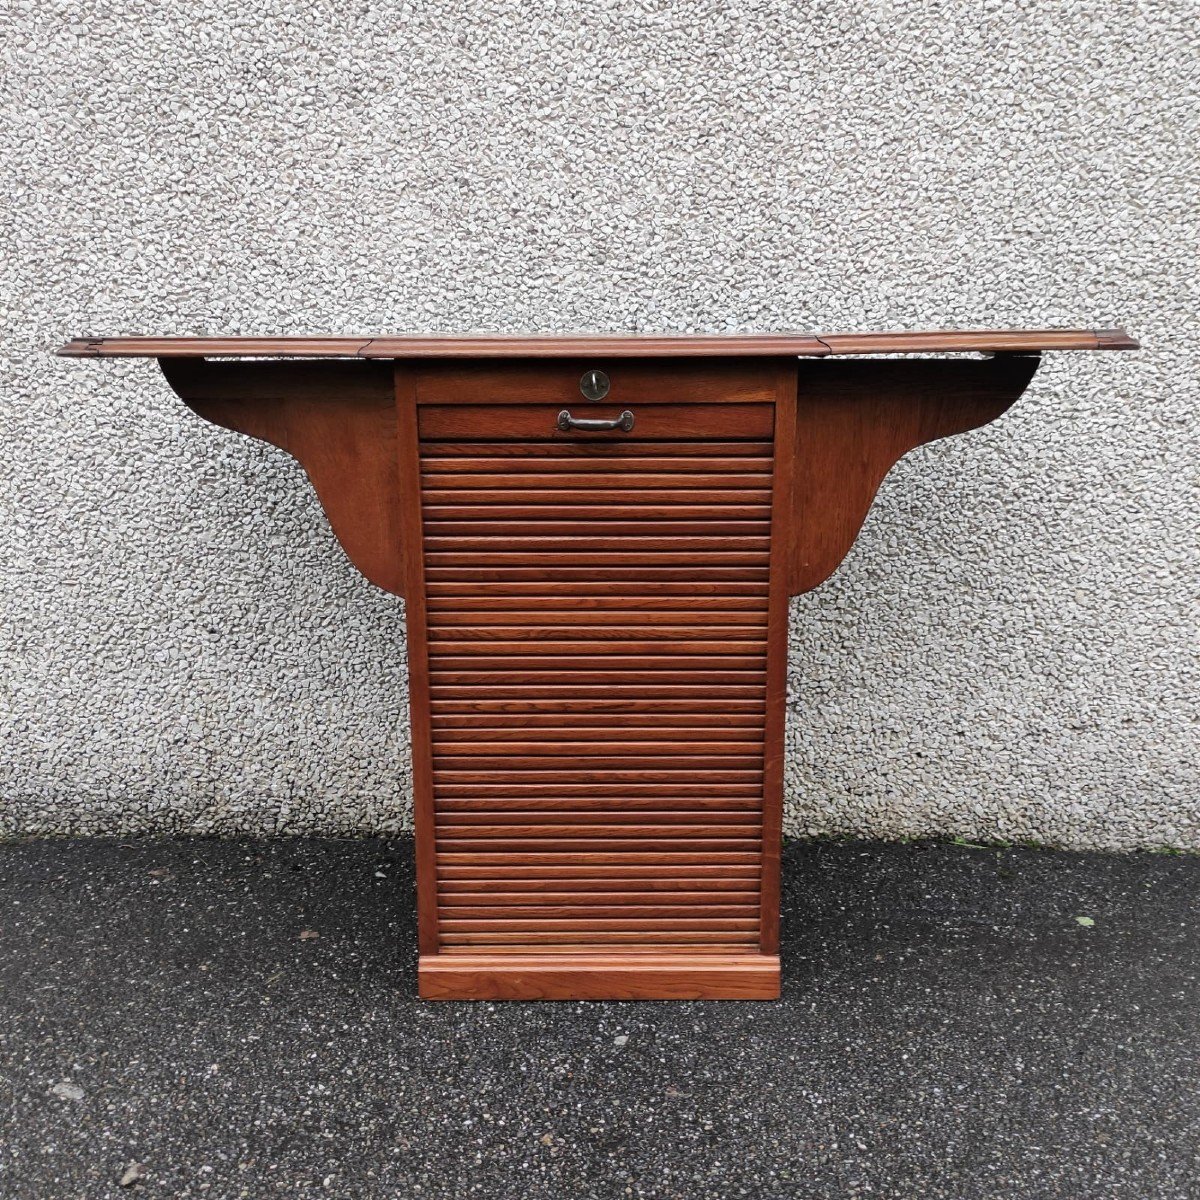 Rolling Shutter Cabinet With Flaps, Early 1900s.-photo-4